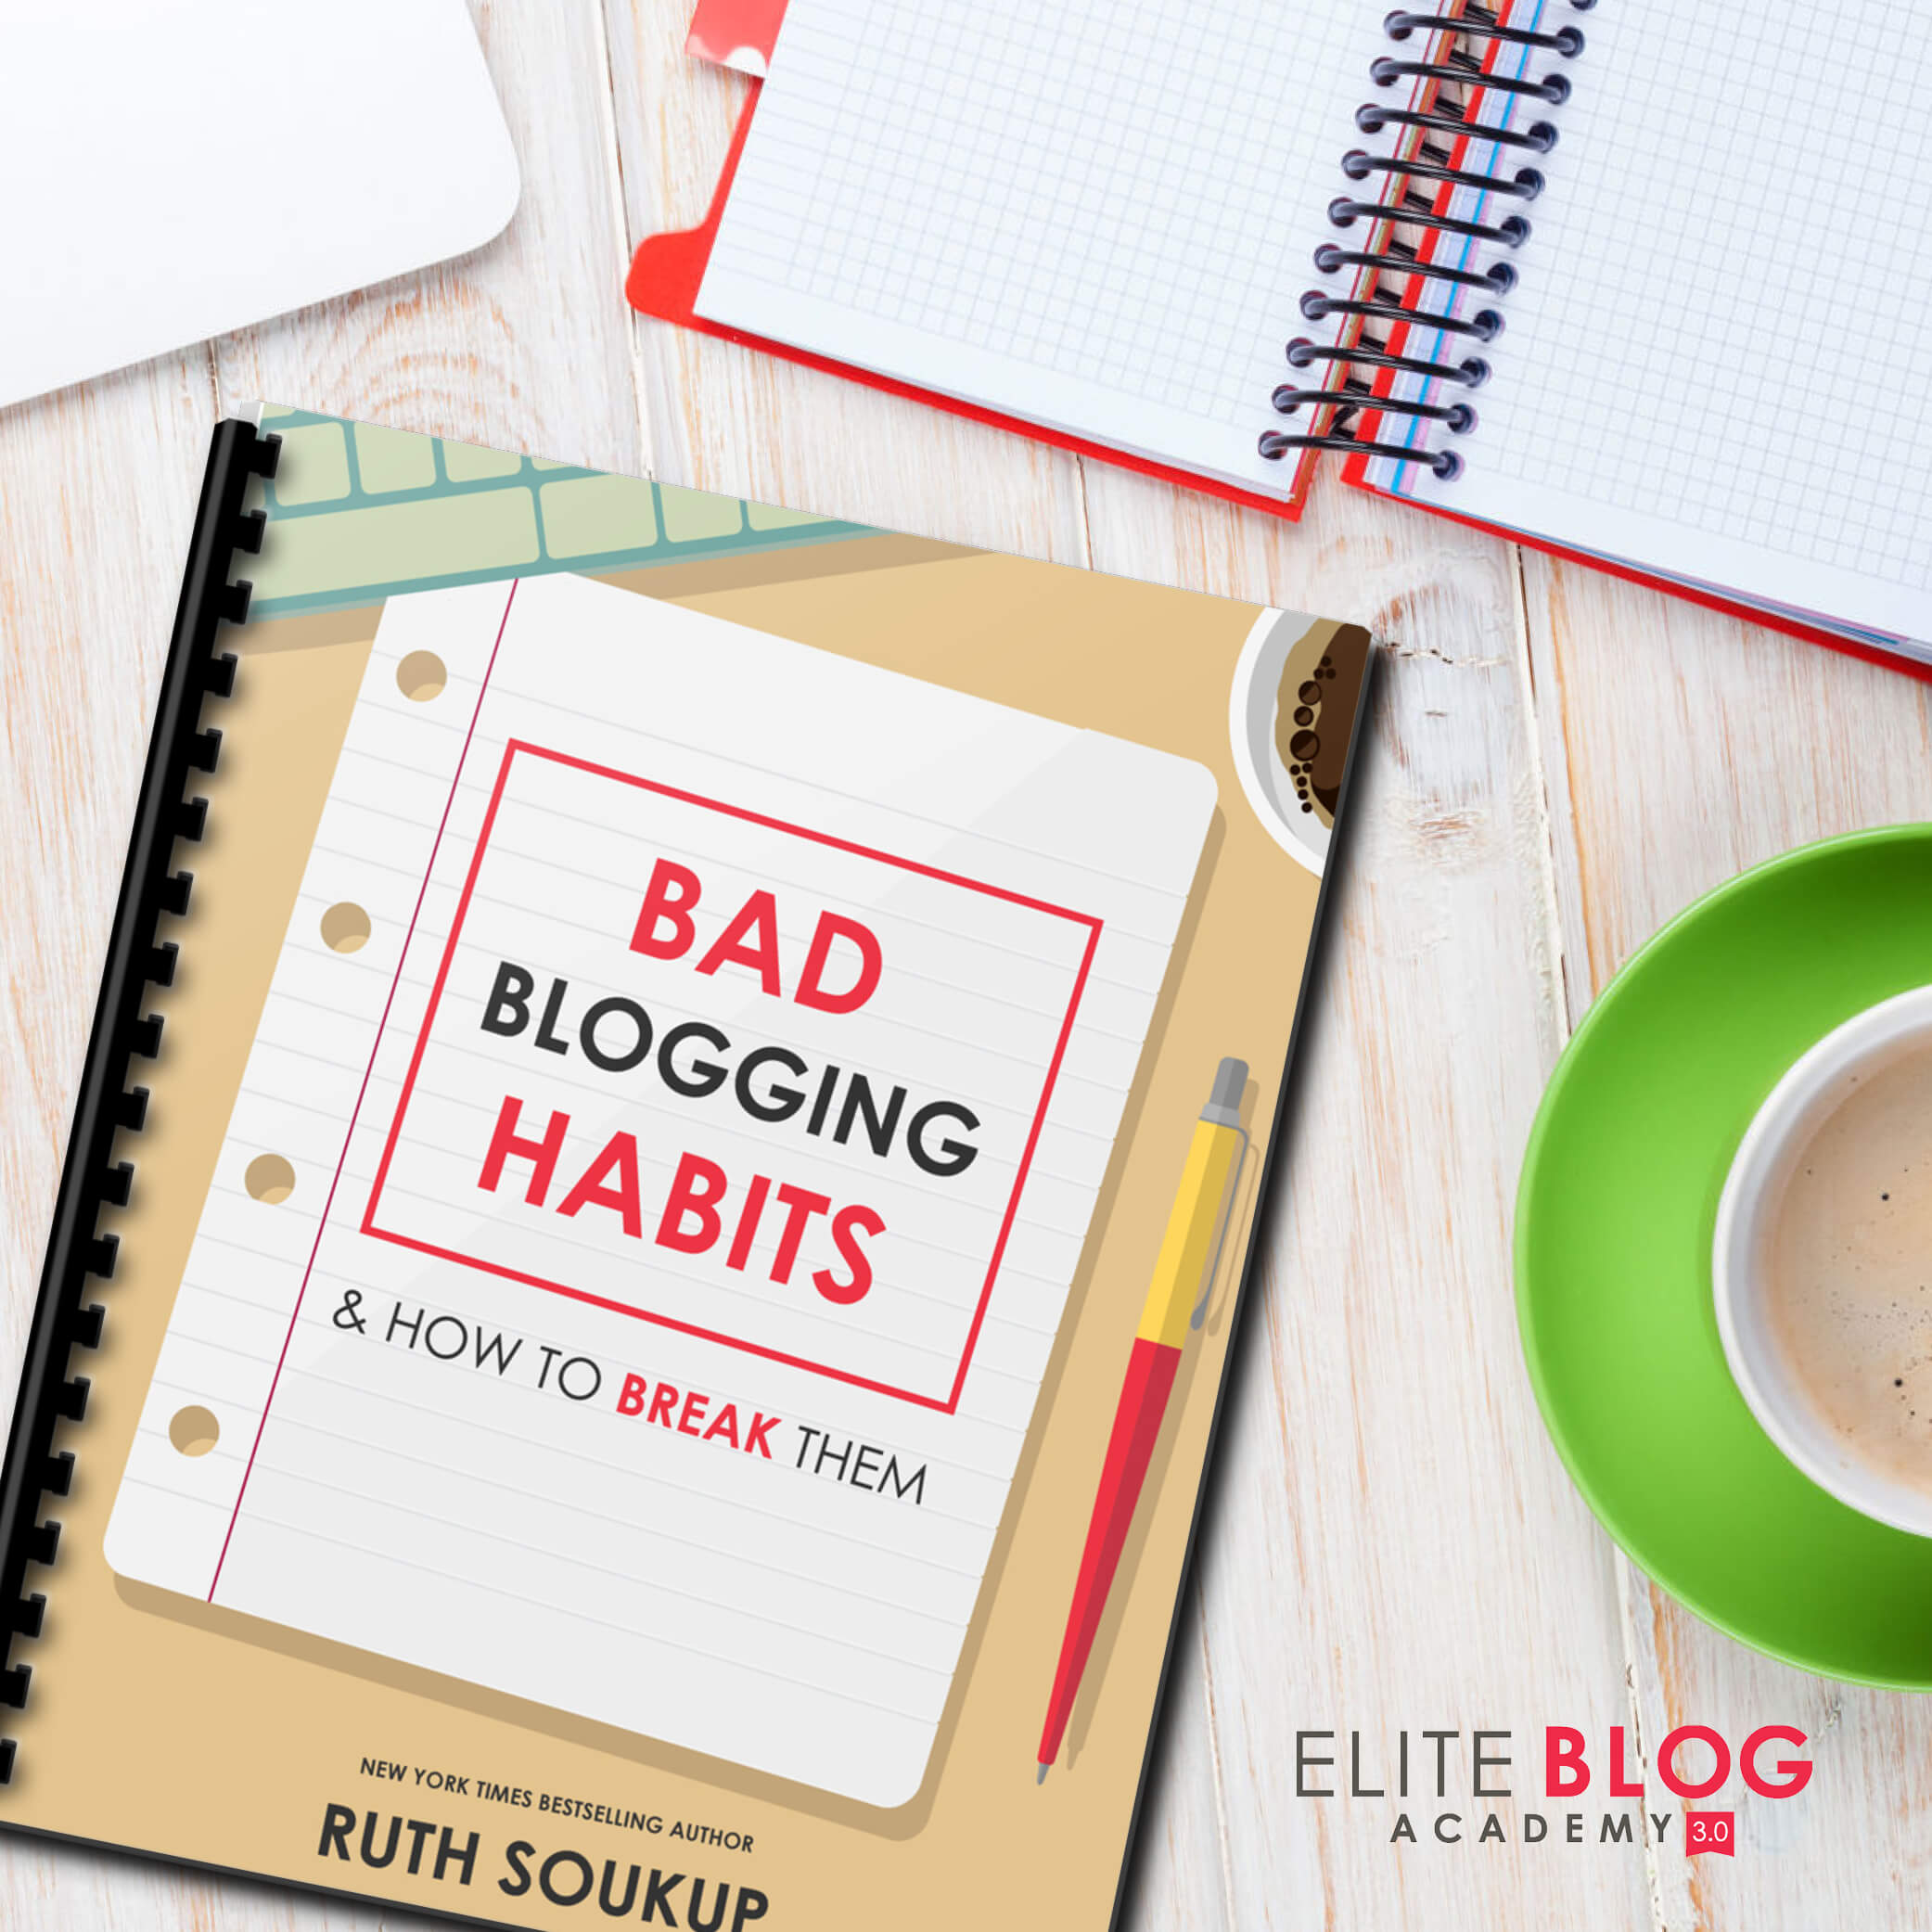 8 Bad Blogging Habits and How to Break Them